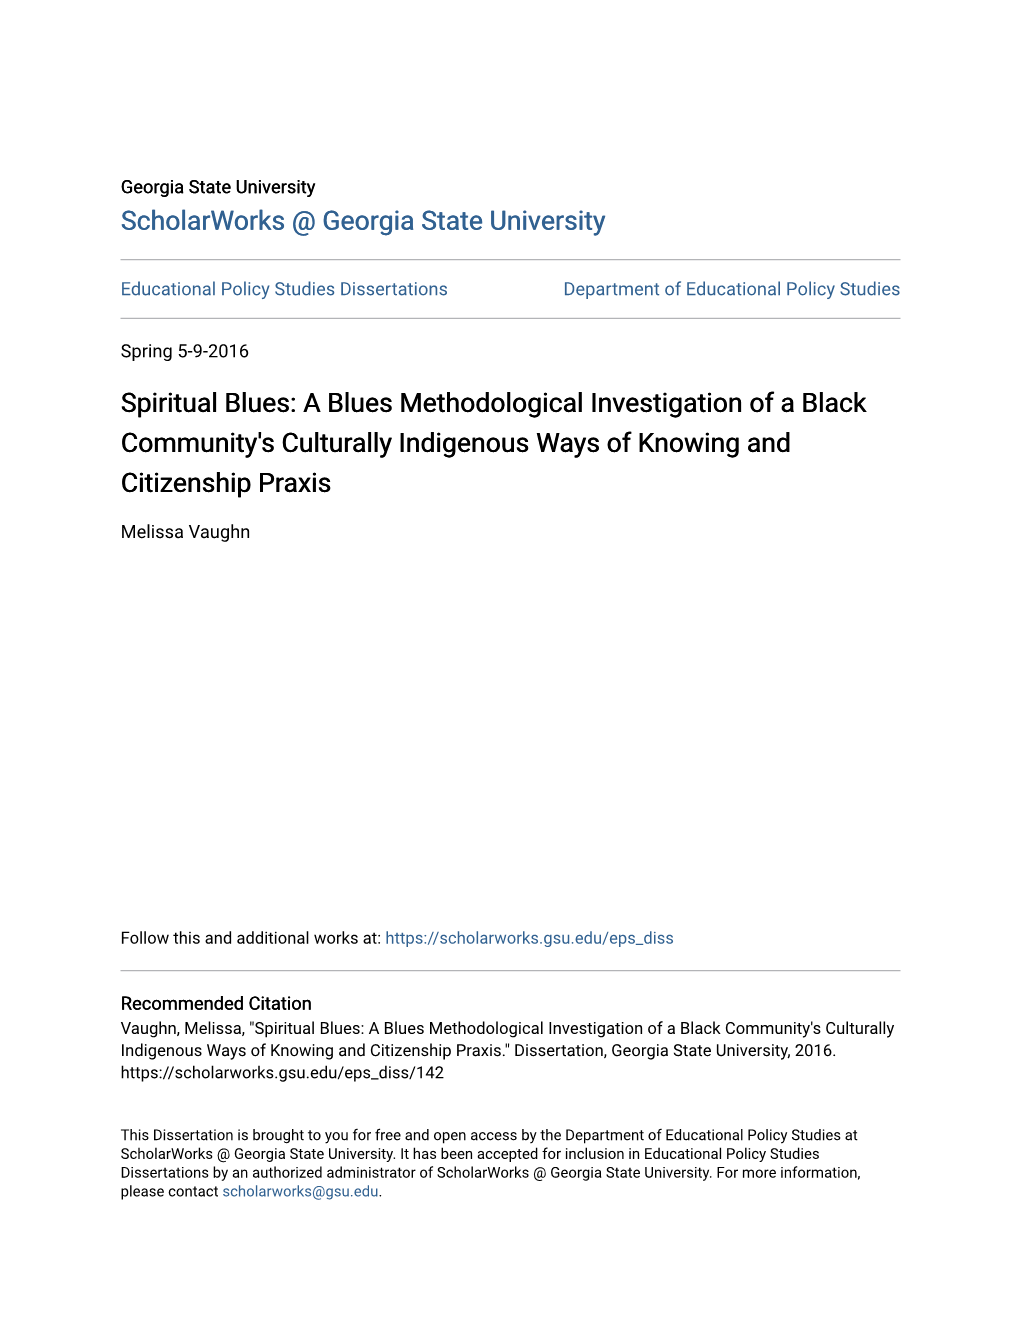 Spiritual Blues: a Blues Methodological Investigation of a Black Community's Culturally Indigenous Ways of Knowing and Citizenship Praxis